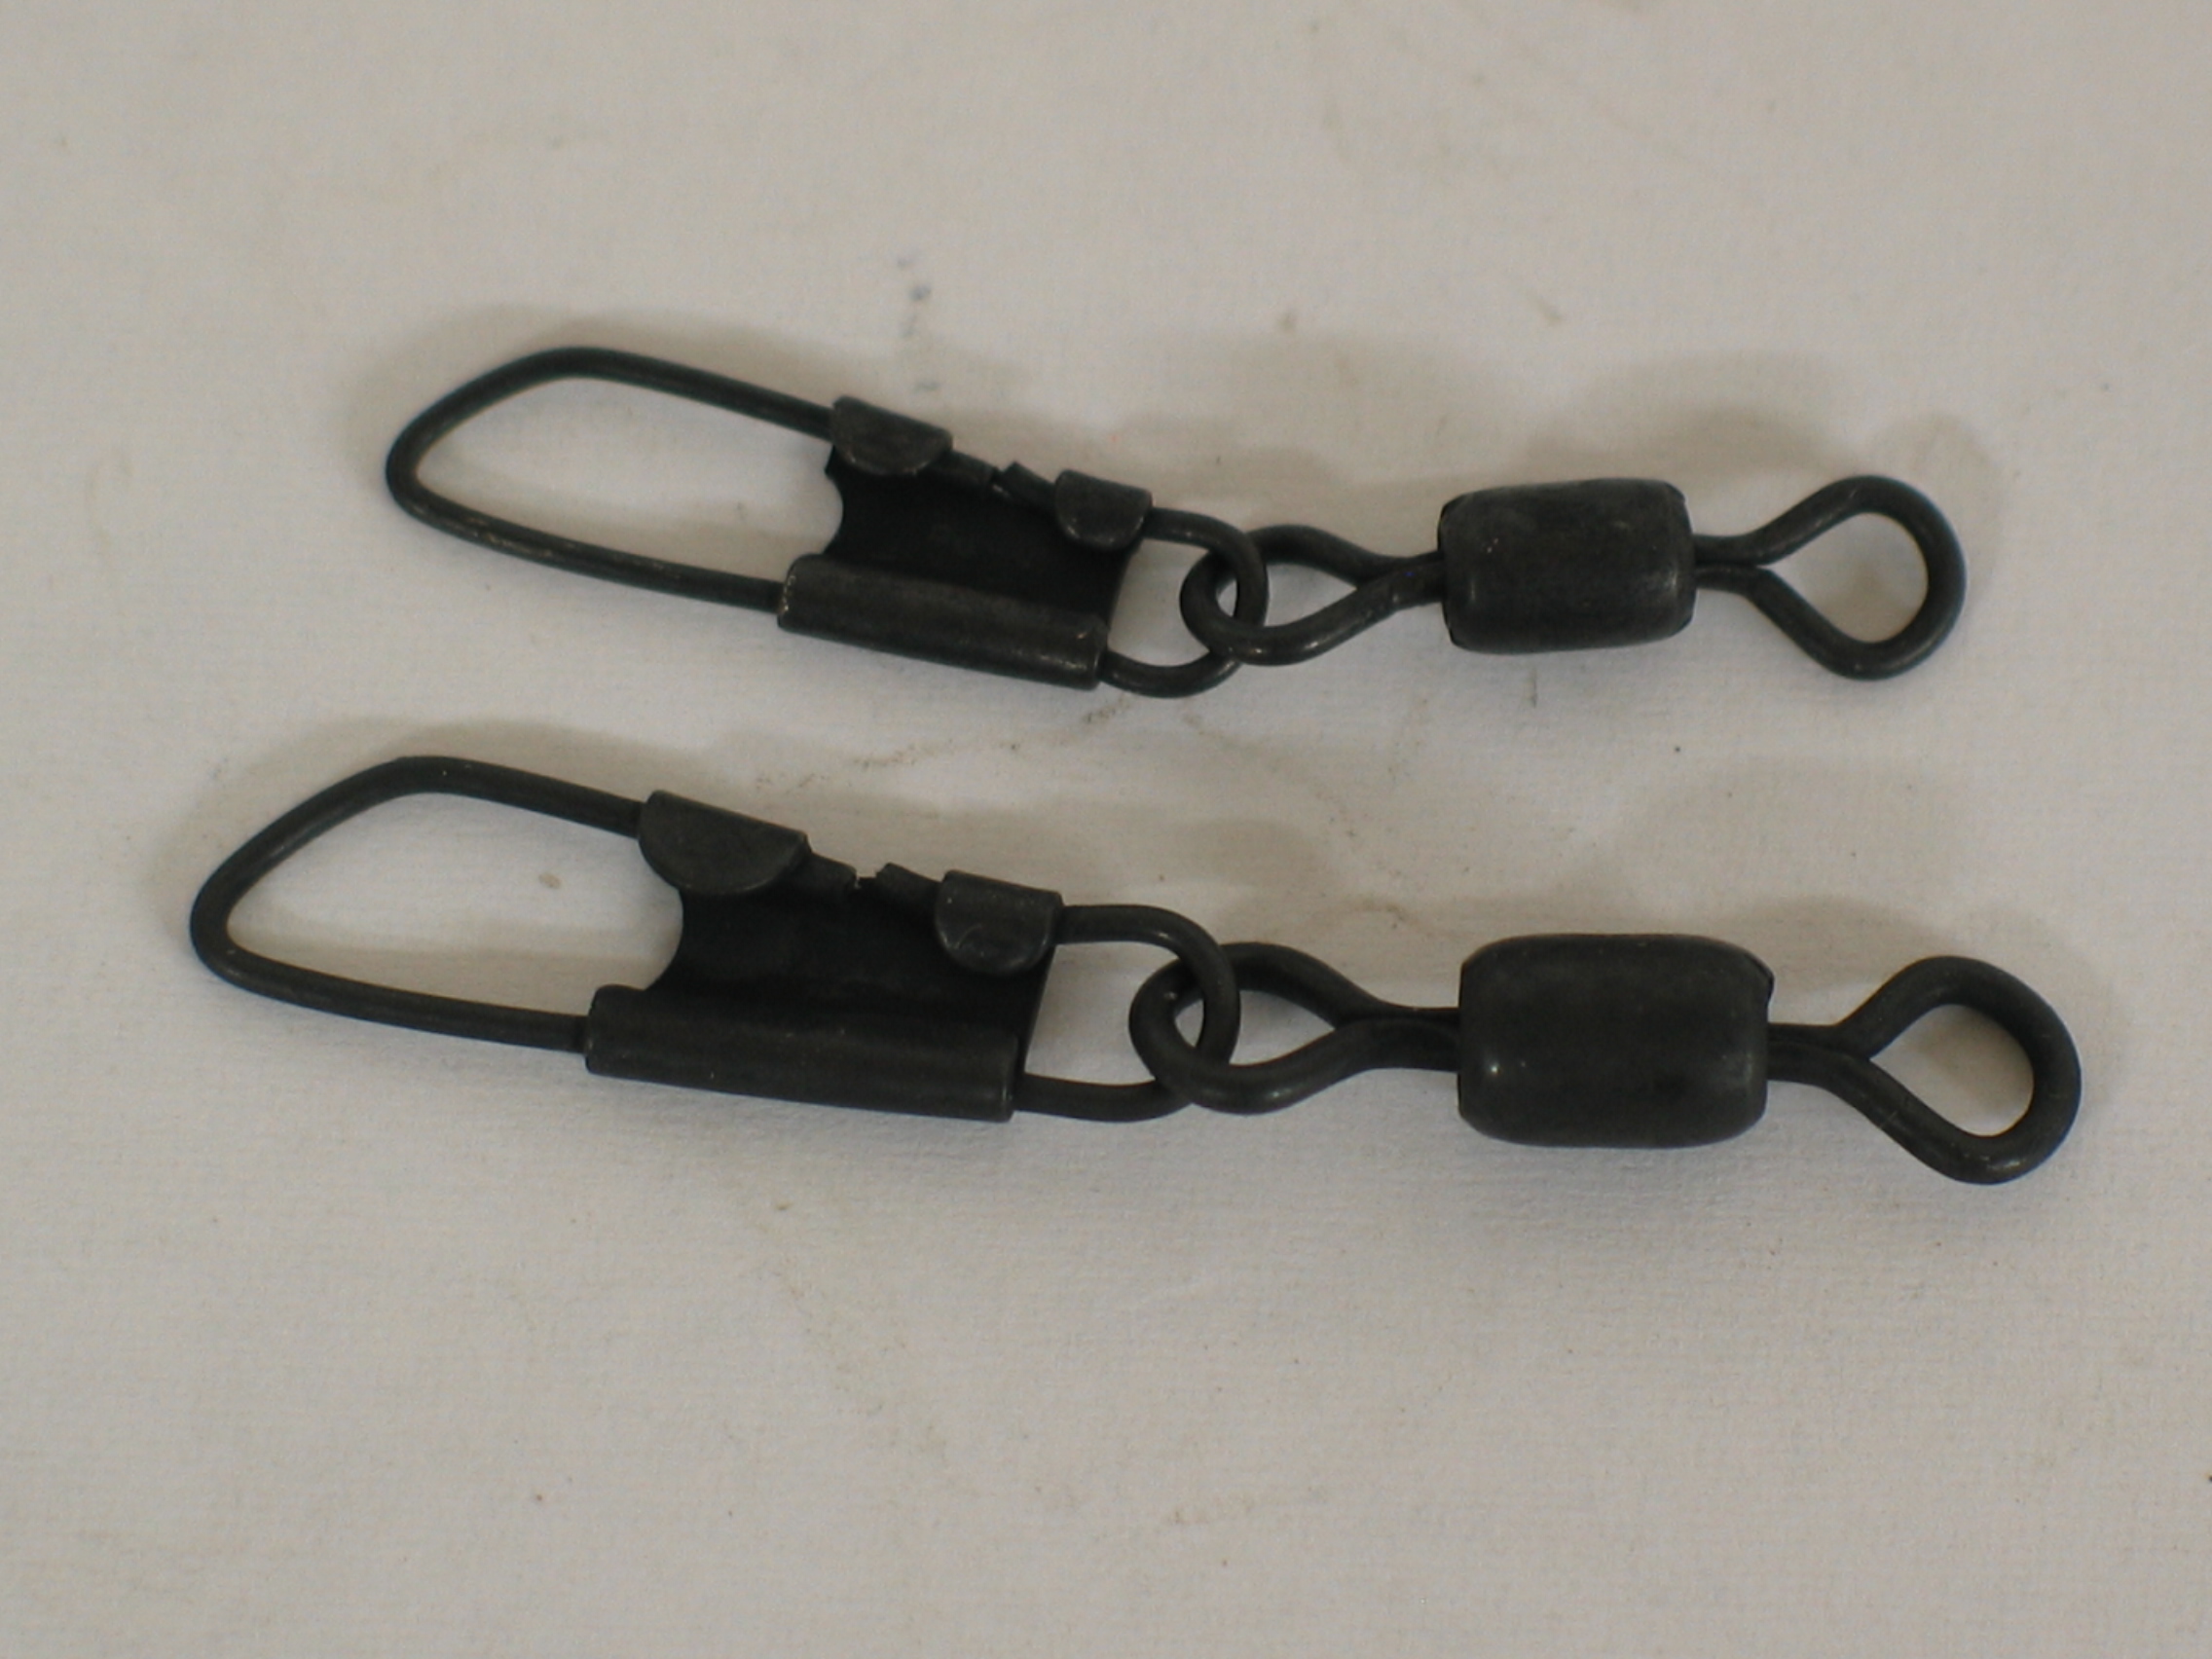 Rosco Black Safety Snap Swivels Made in U.S.A.